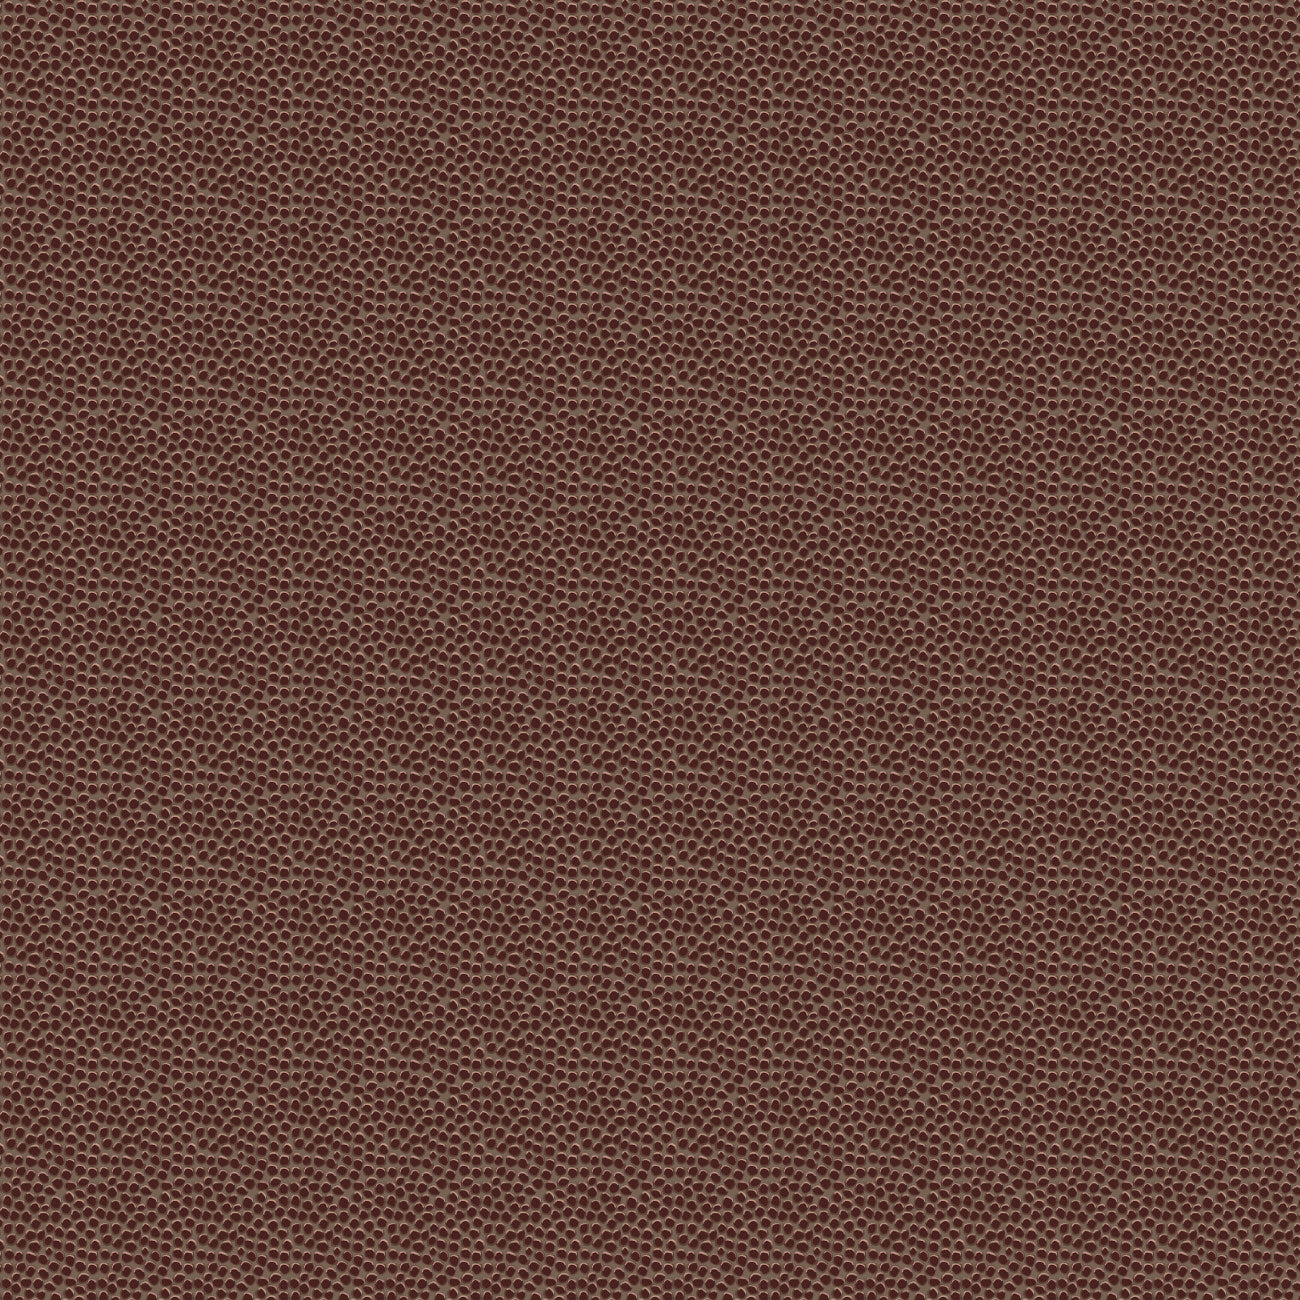 Fall is for Football Collection-Ball Texture-Brown-100% Cotton 49230708-01